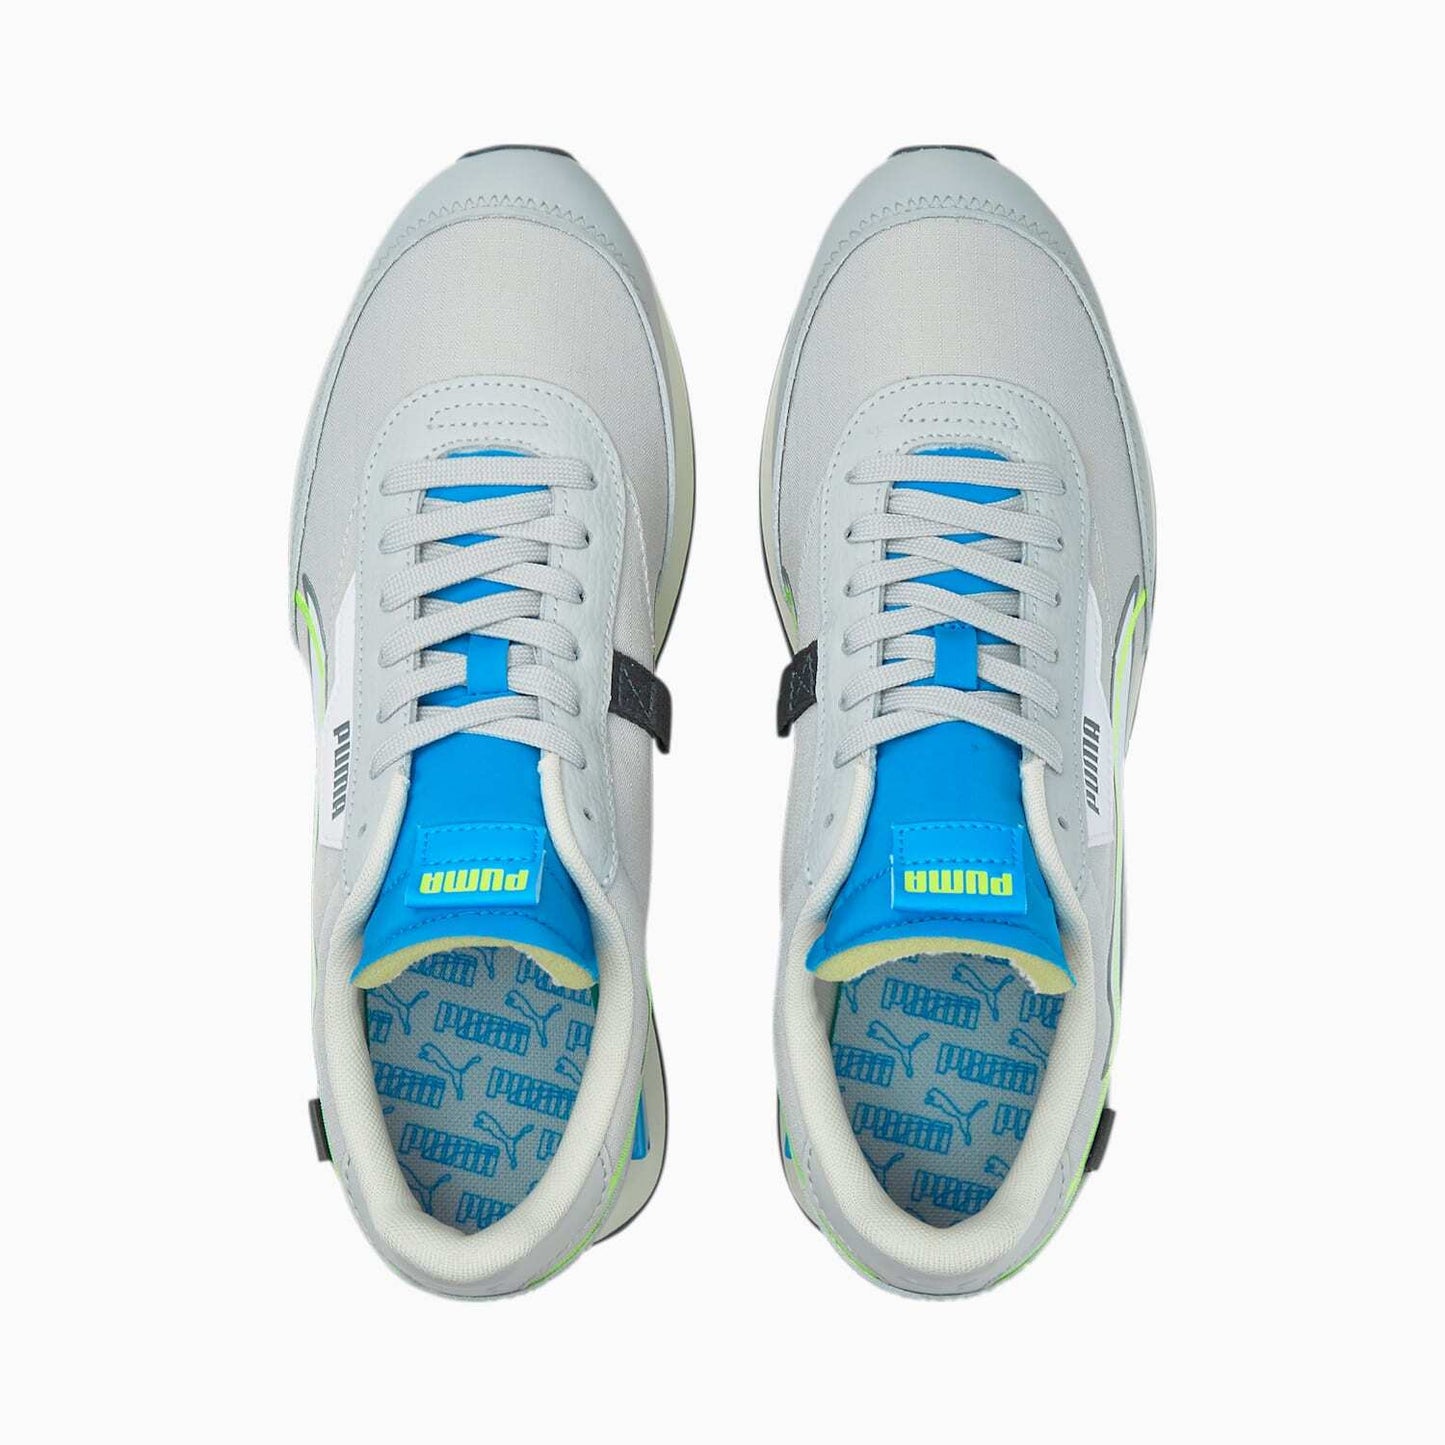 Future Rider Twofold Unisex Sneakers-38059110